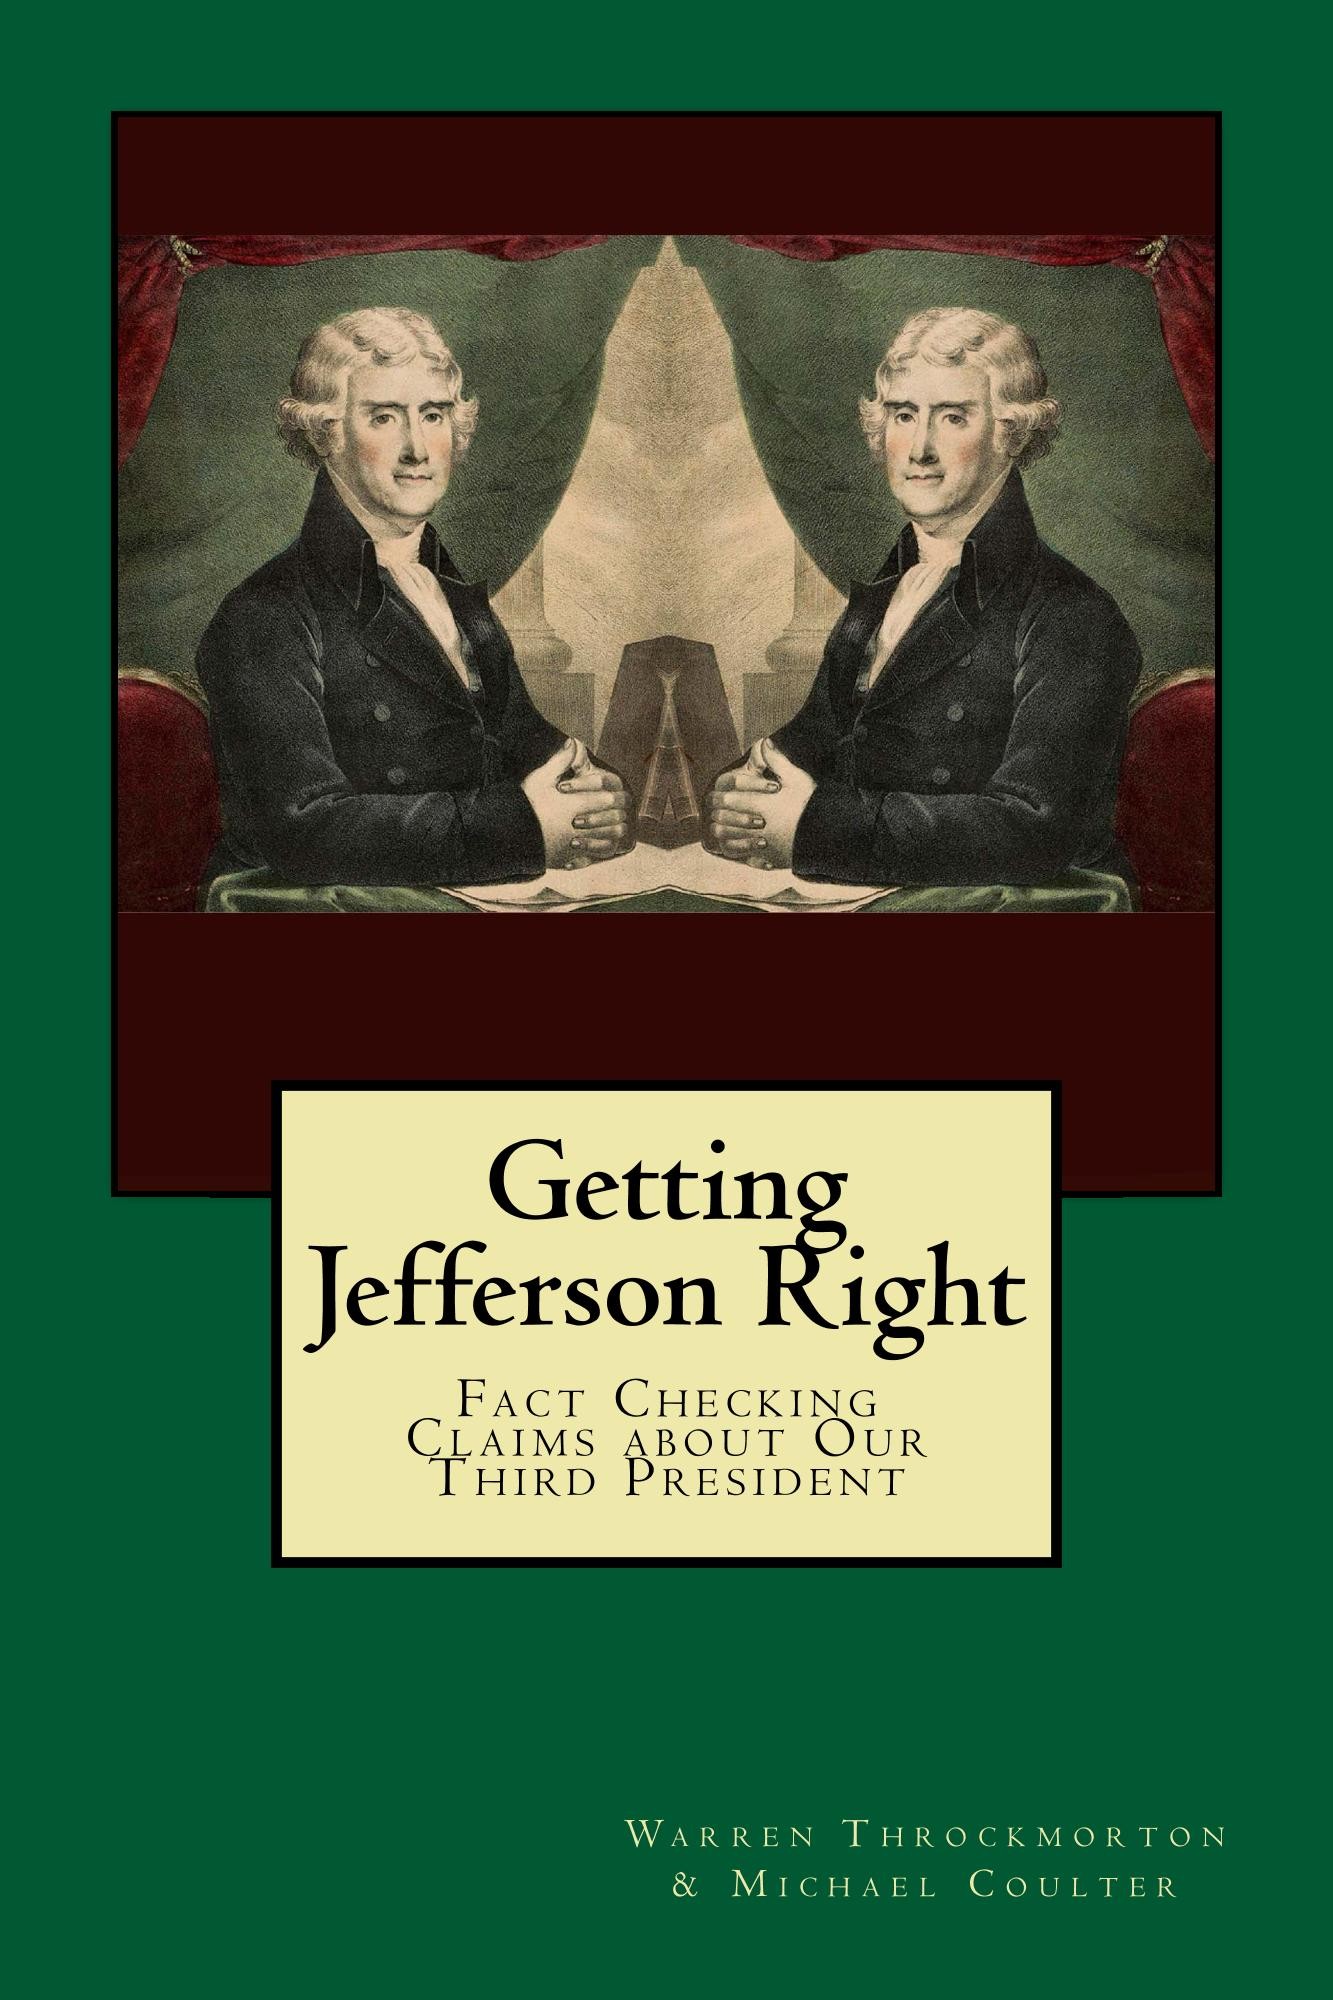 Getting Jefferson Right: Fact Checking Claims About Our Third President